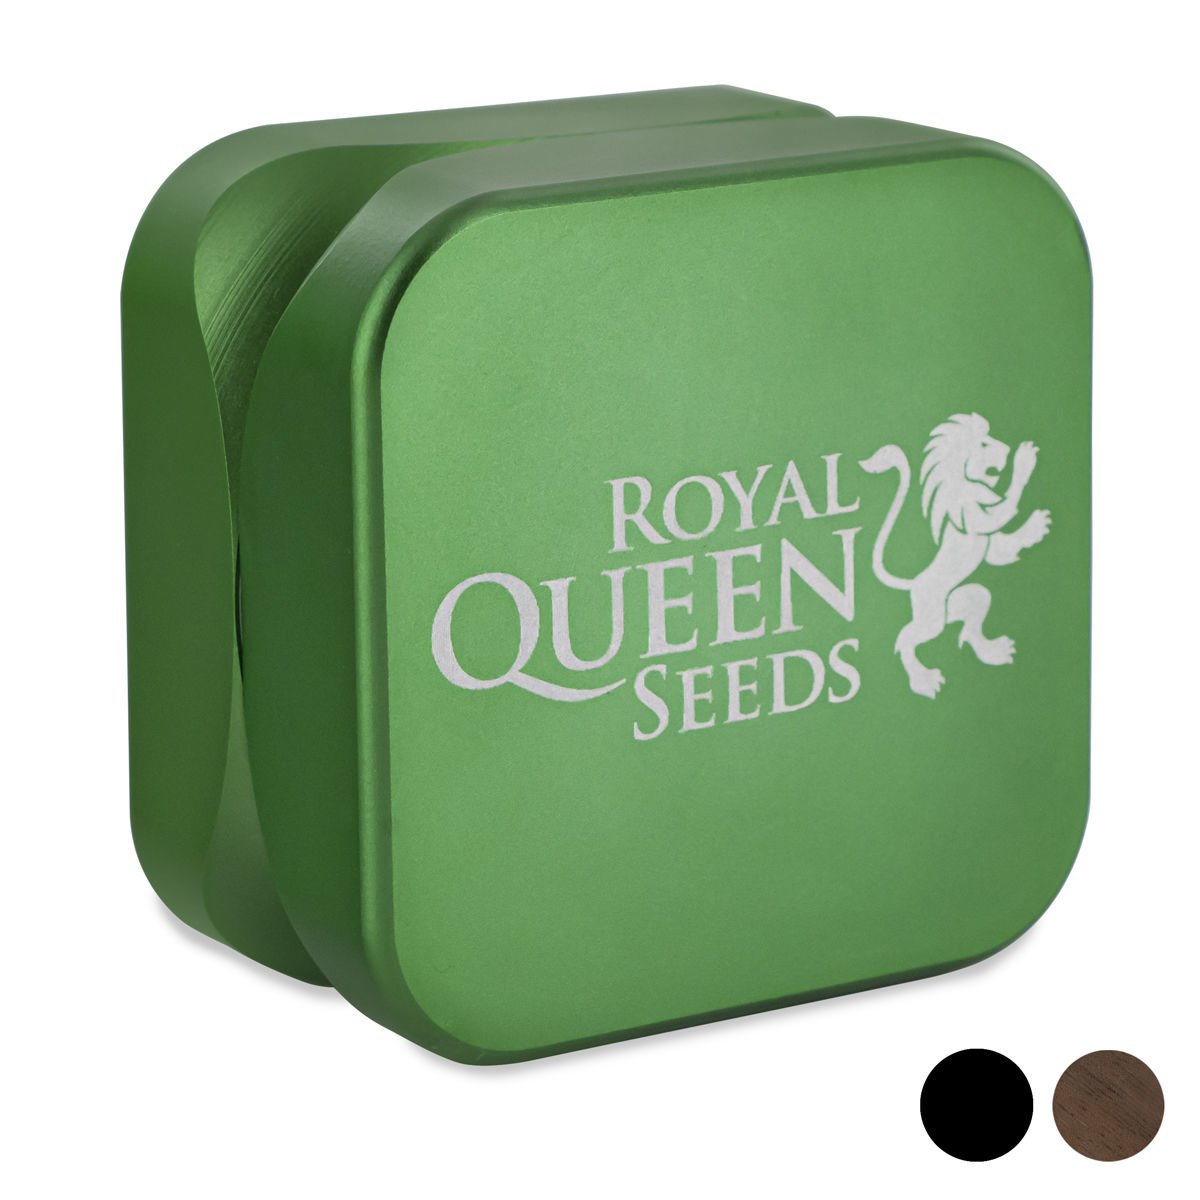 How And Why To Use A Cannabis Grinder - Royal Queen Seeds